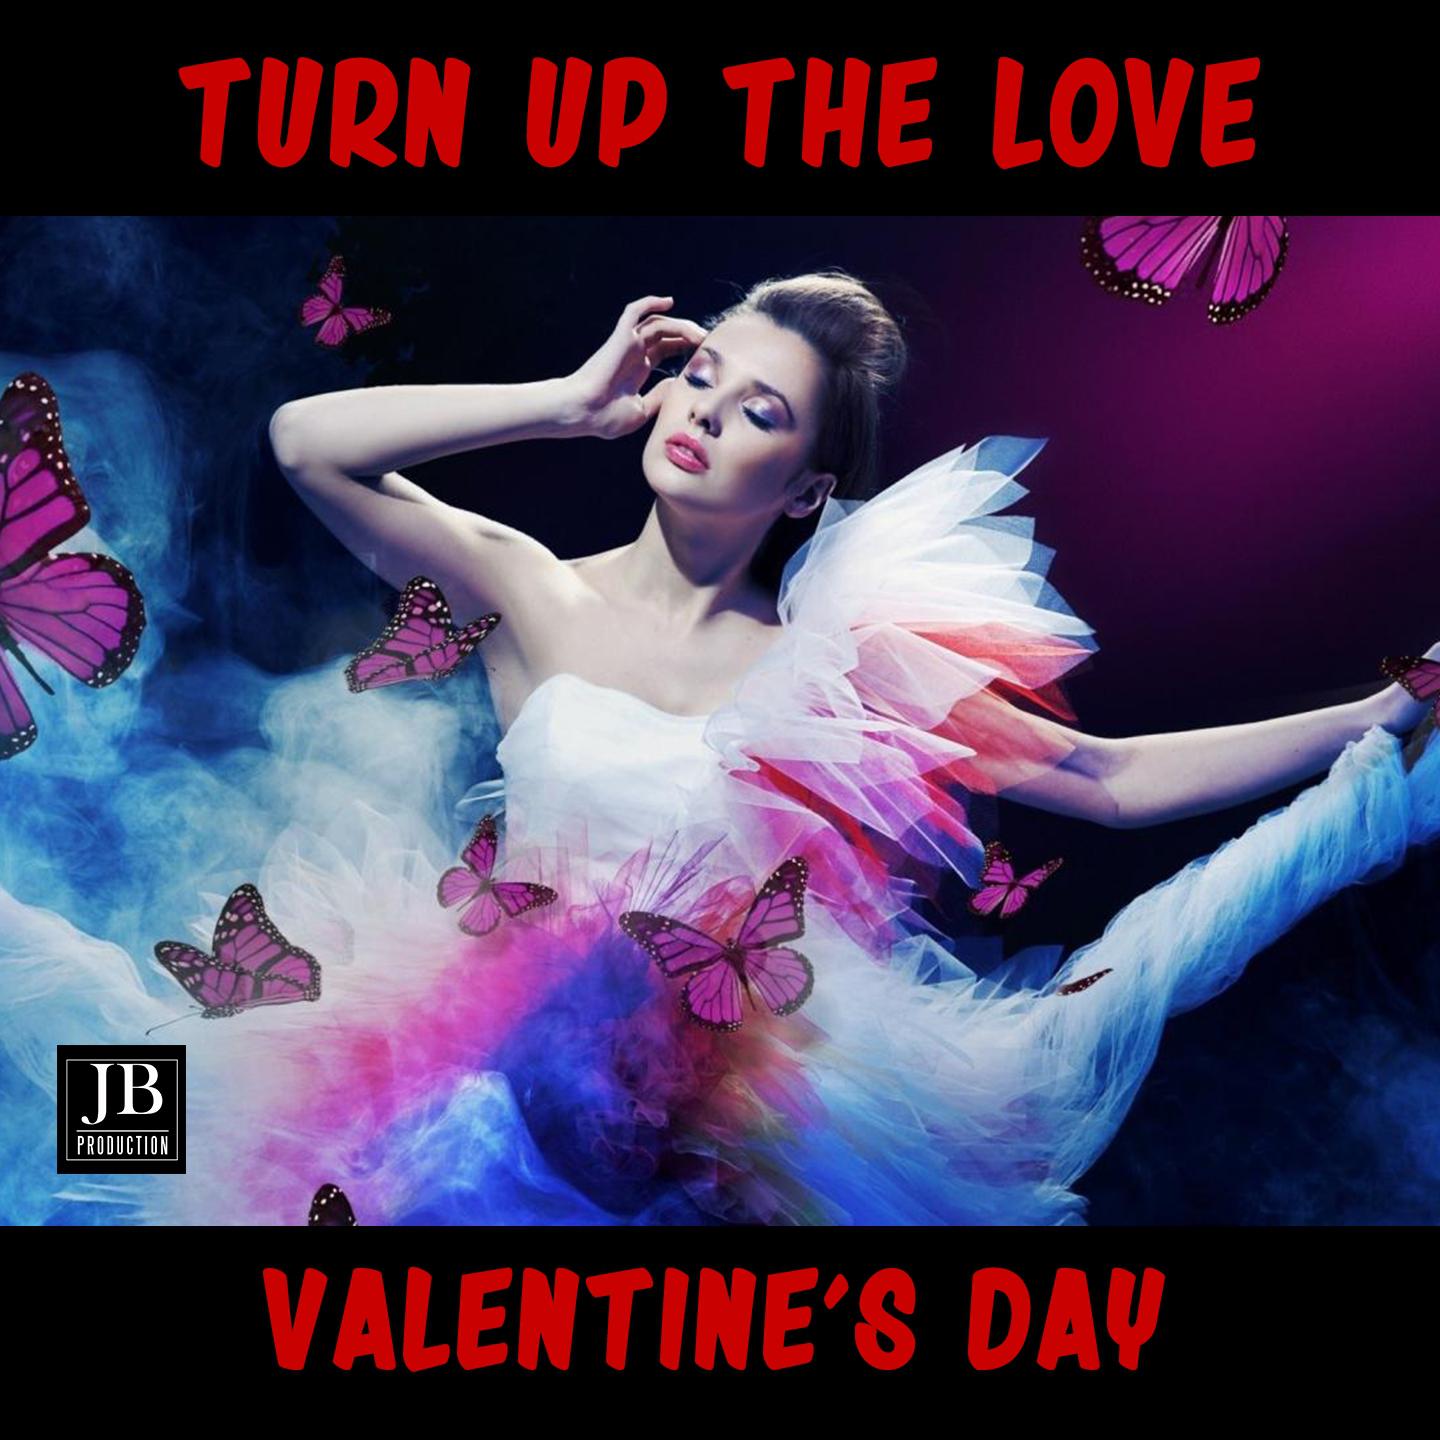 Turn Up The Love (Valentine's Day)